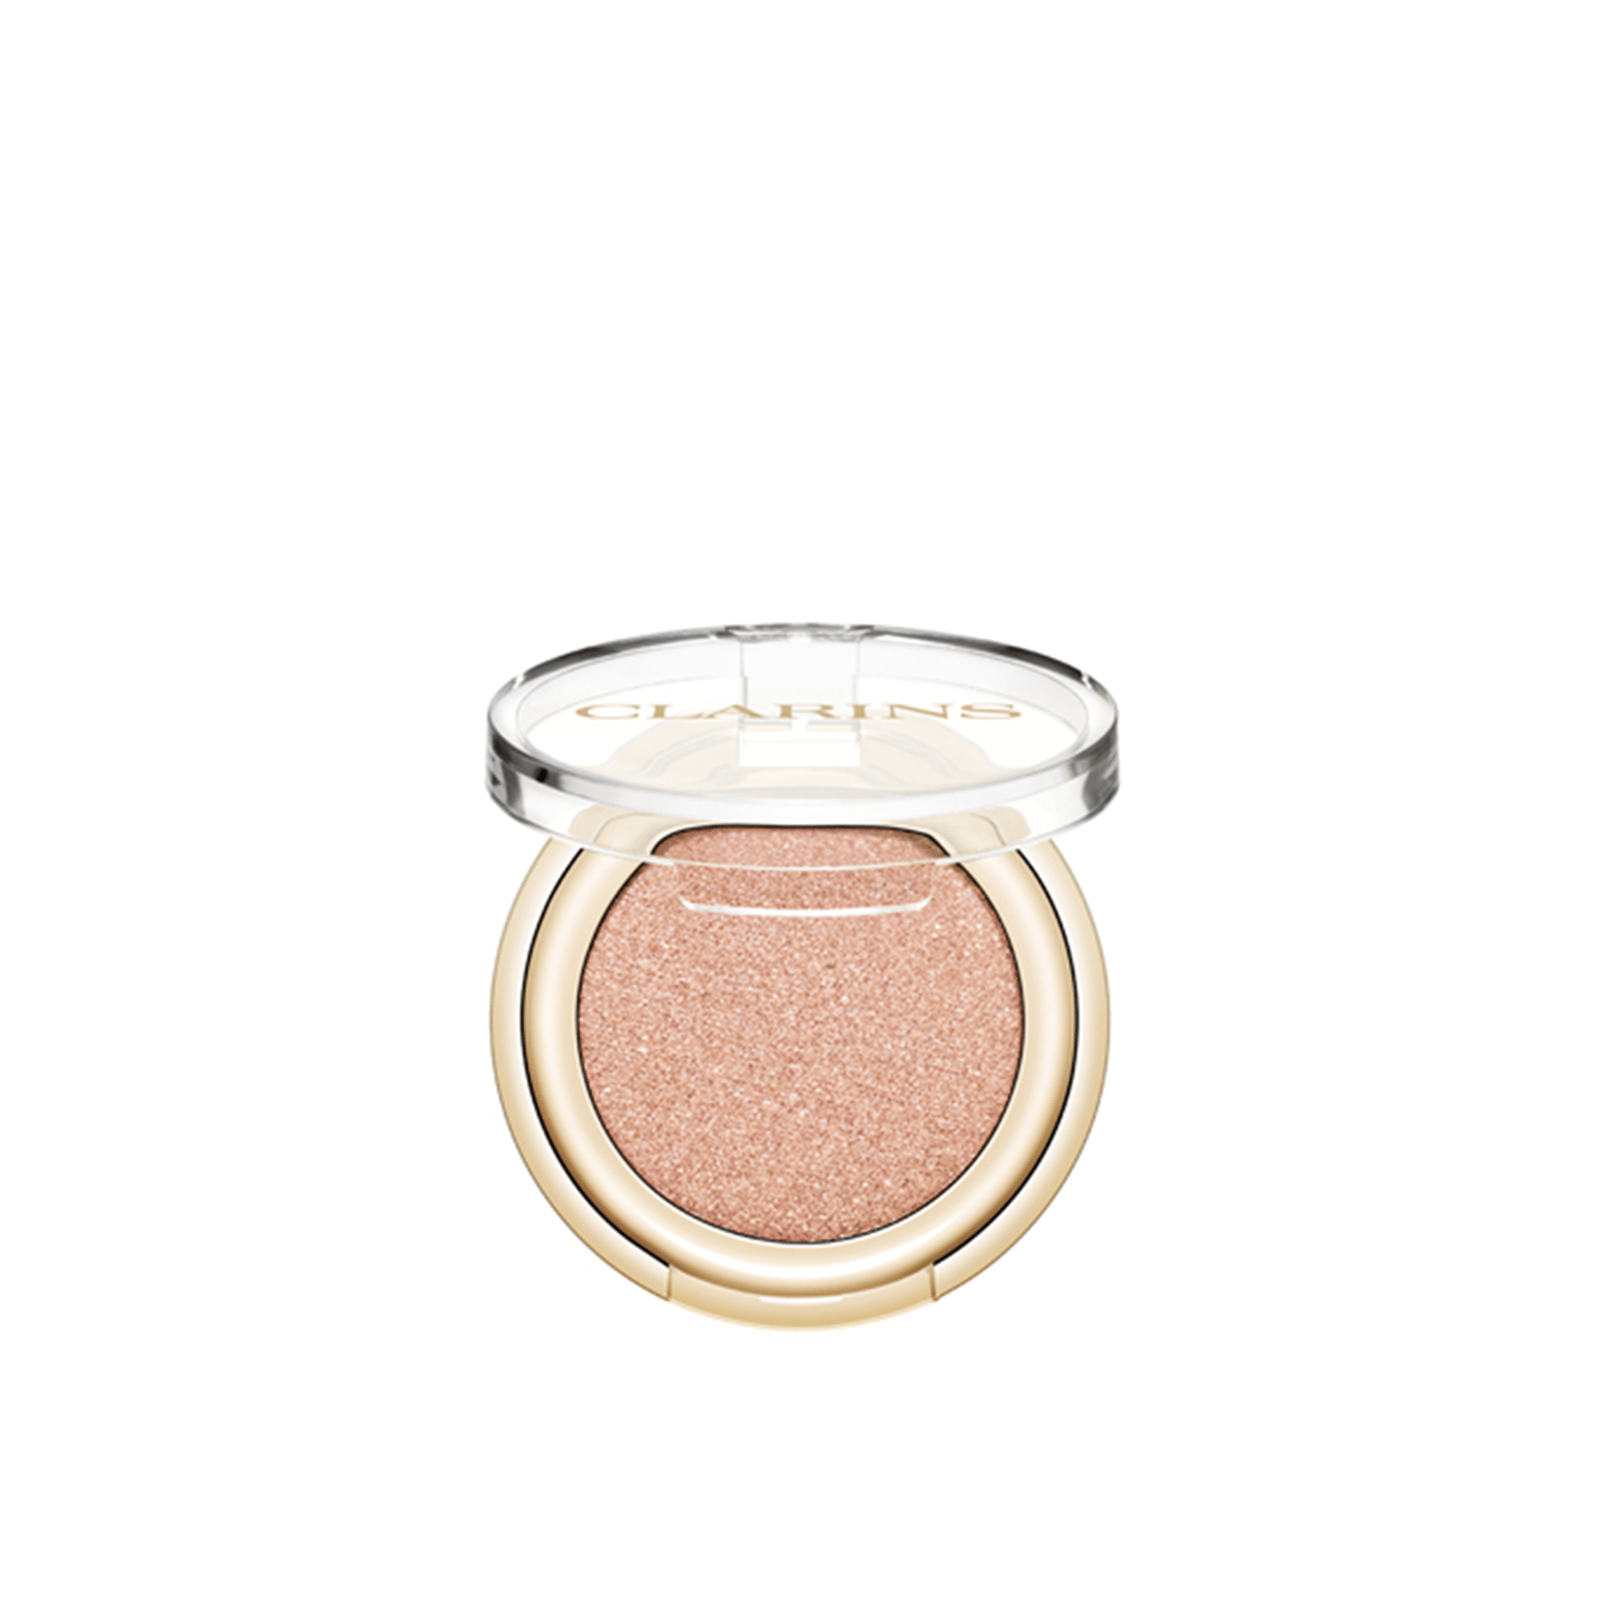 Clarins Ombre Skin Intense Colour Powder Eyeshadow 02 Pearly Rosegold 1.5g (0.05 oz)